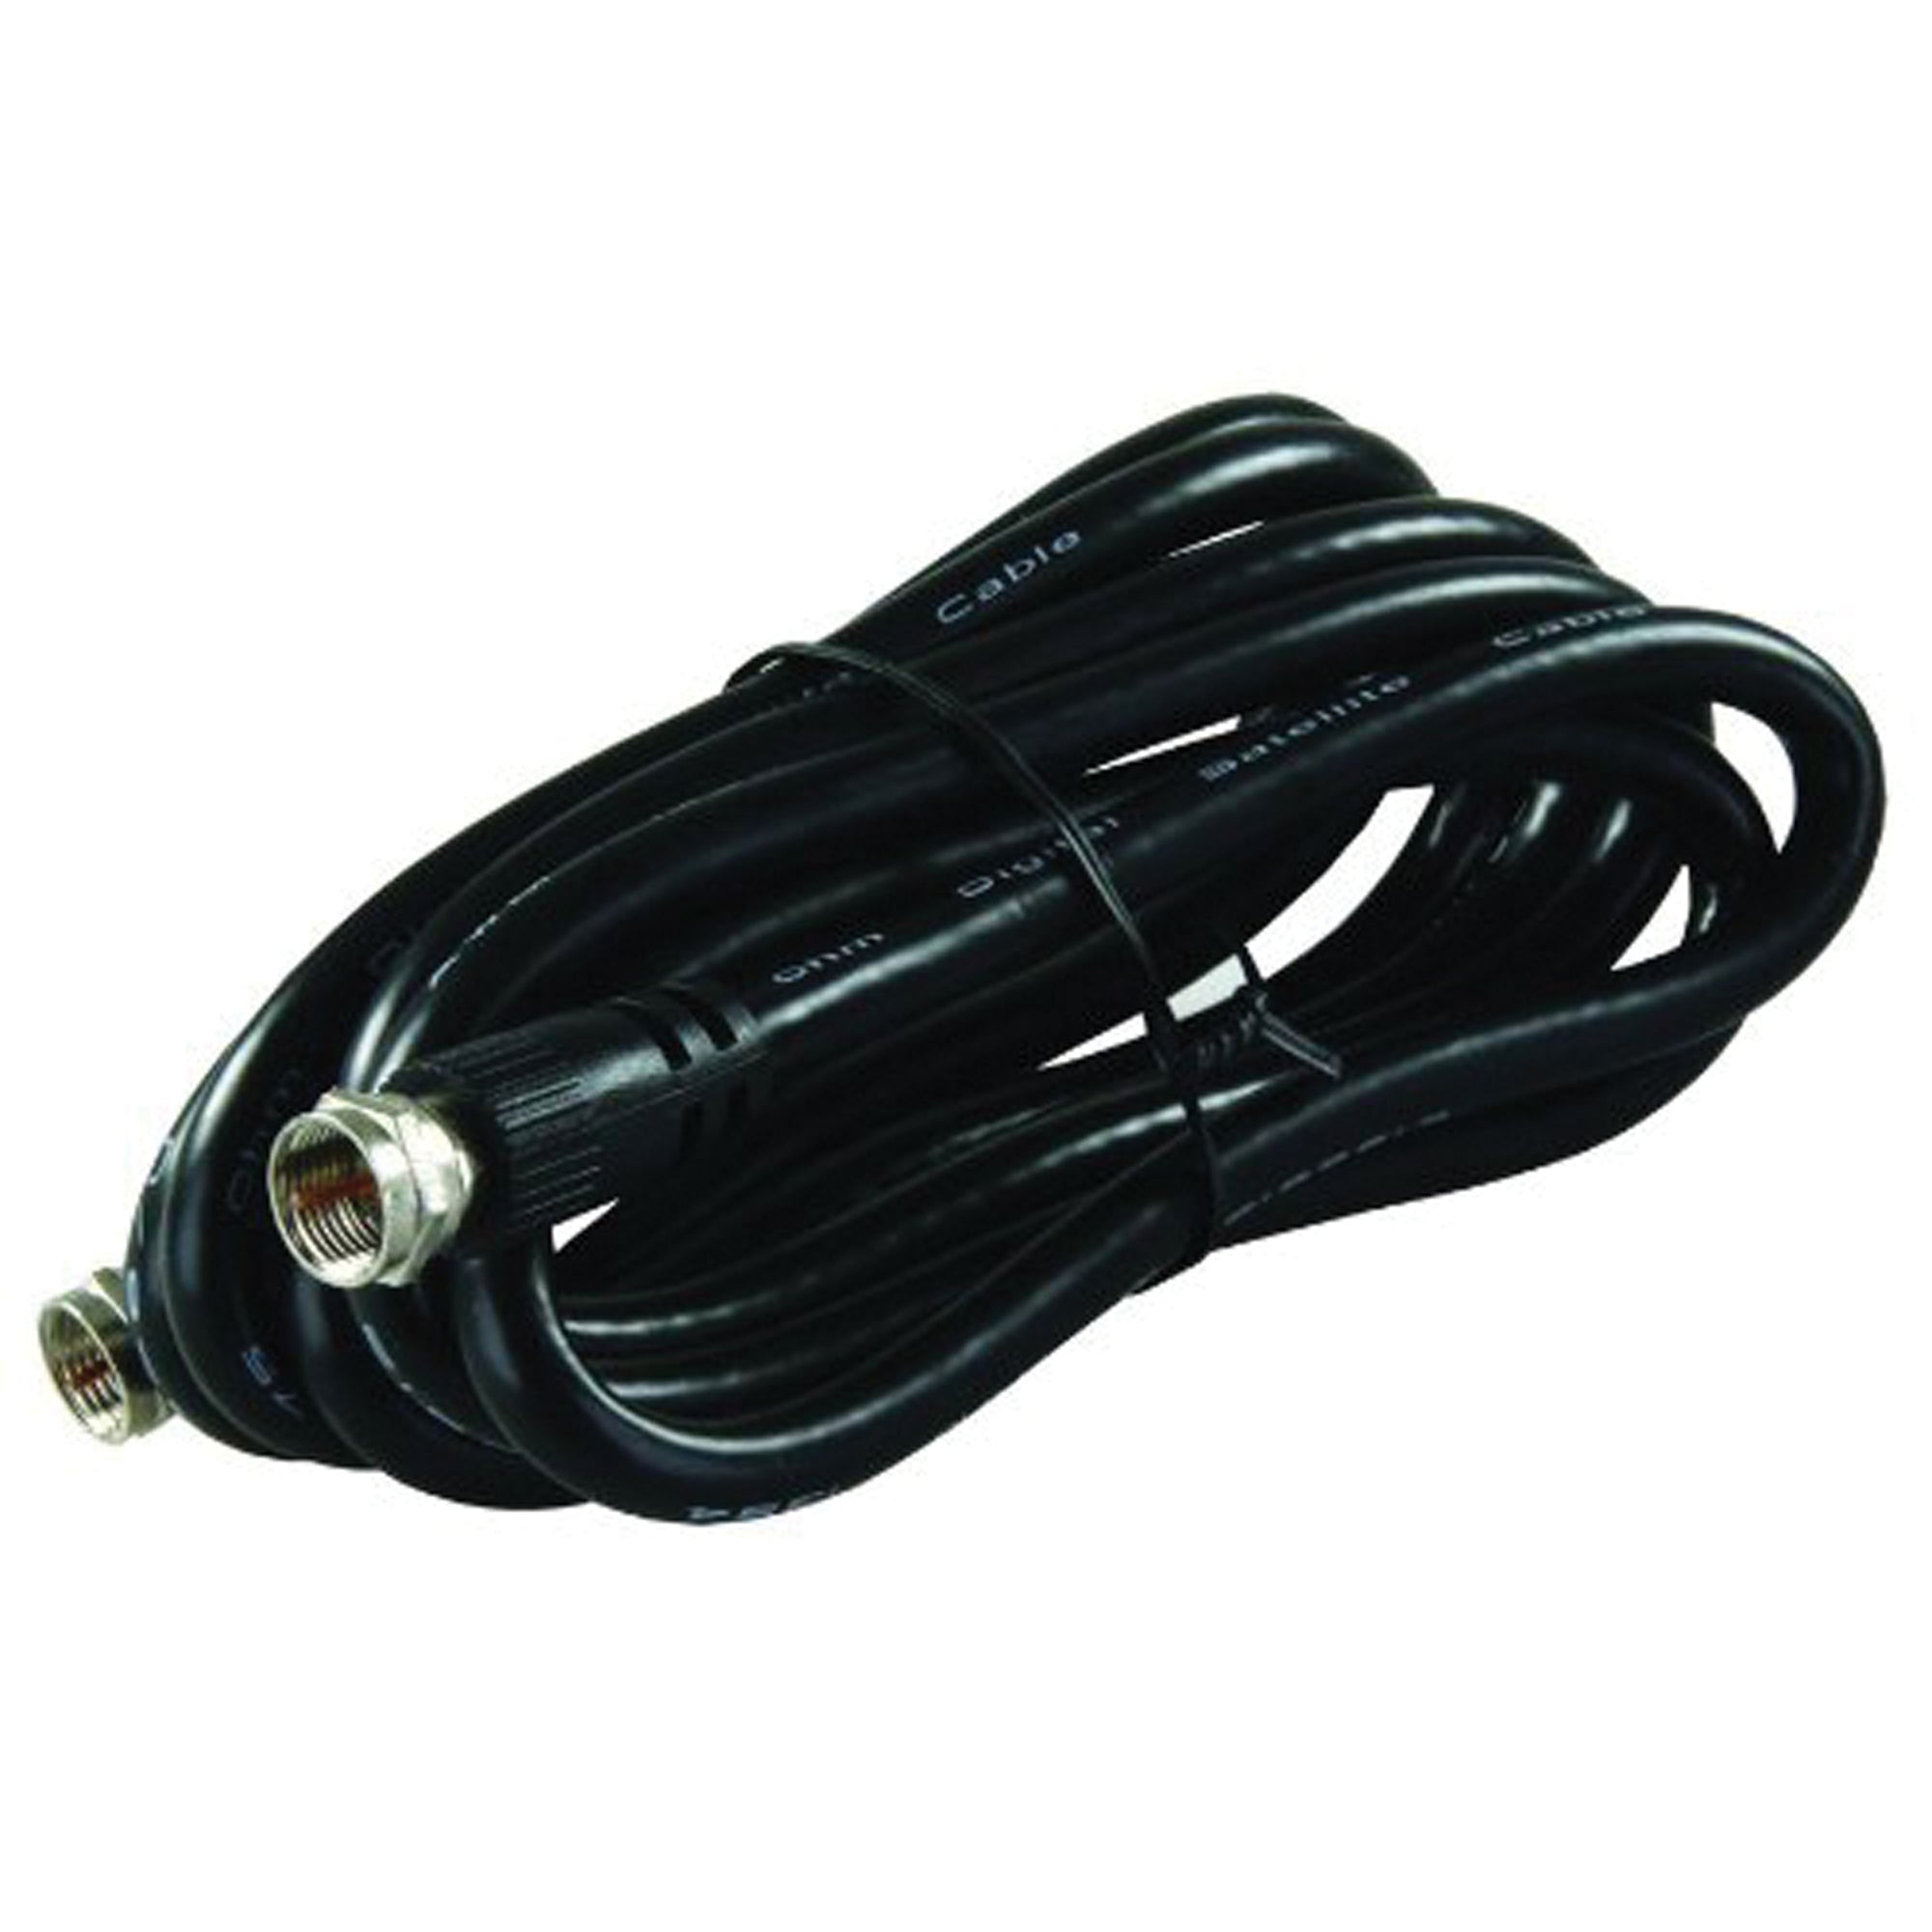 JR Products 47425 RG6 Interior TV Cable - 6'